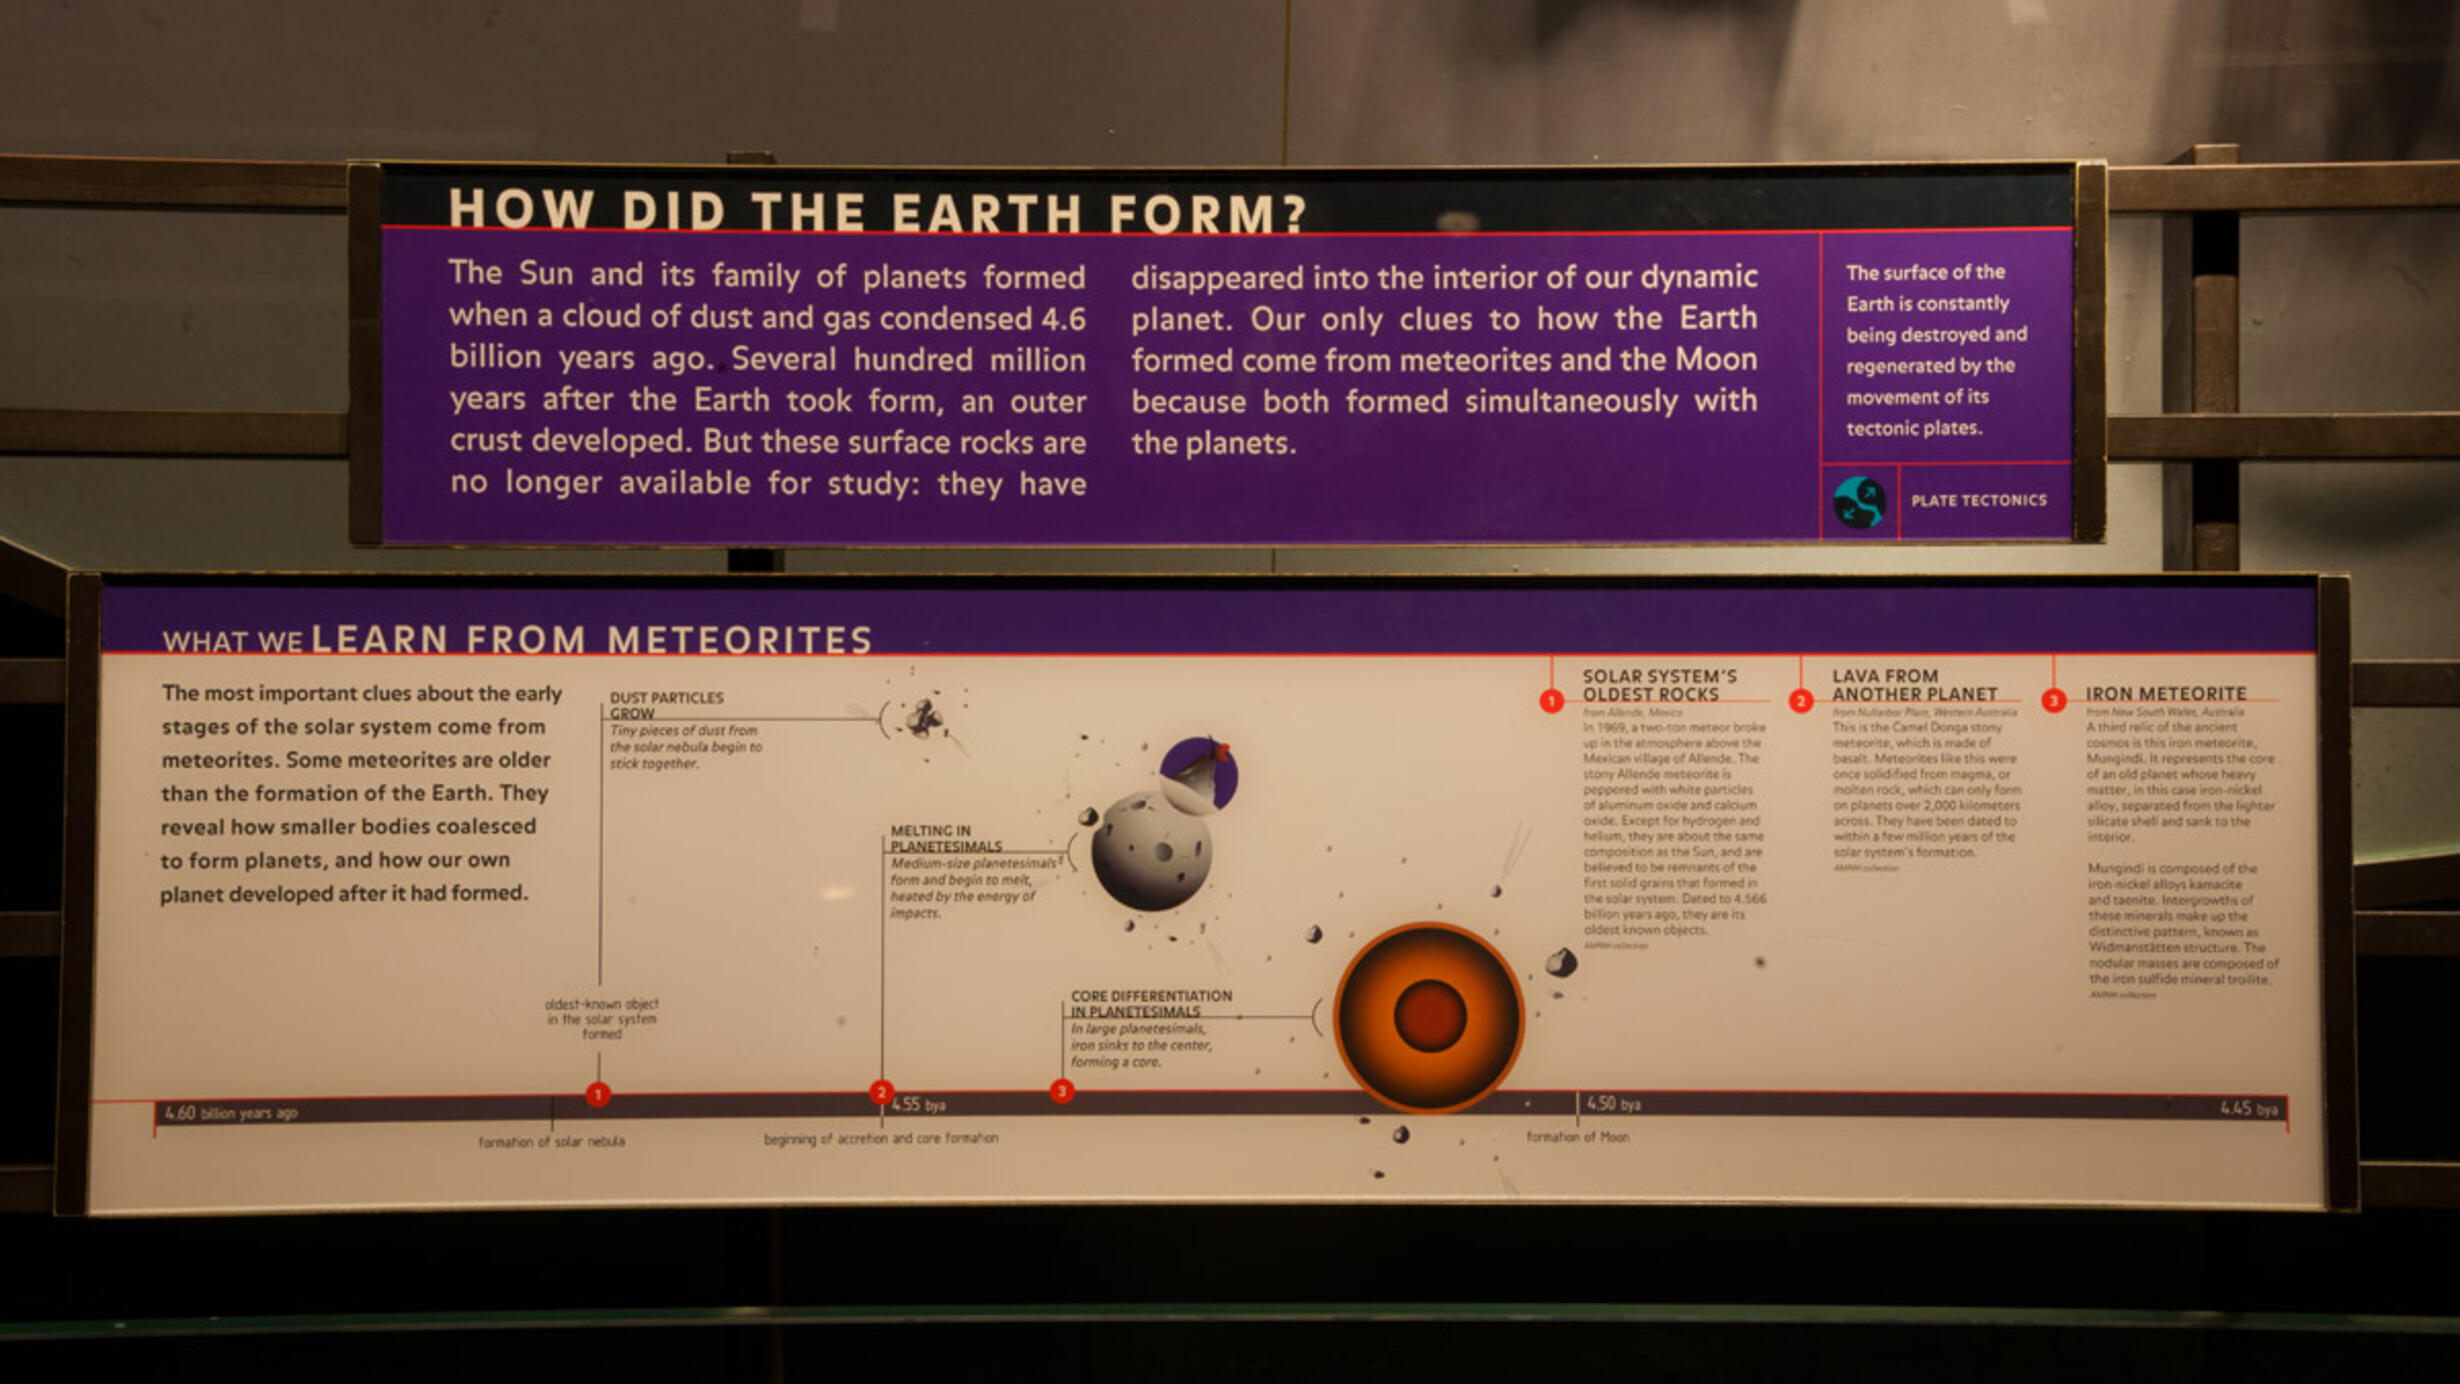 How Did the Earth Form? What We Learn From Meteorites